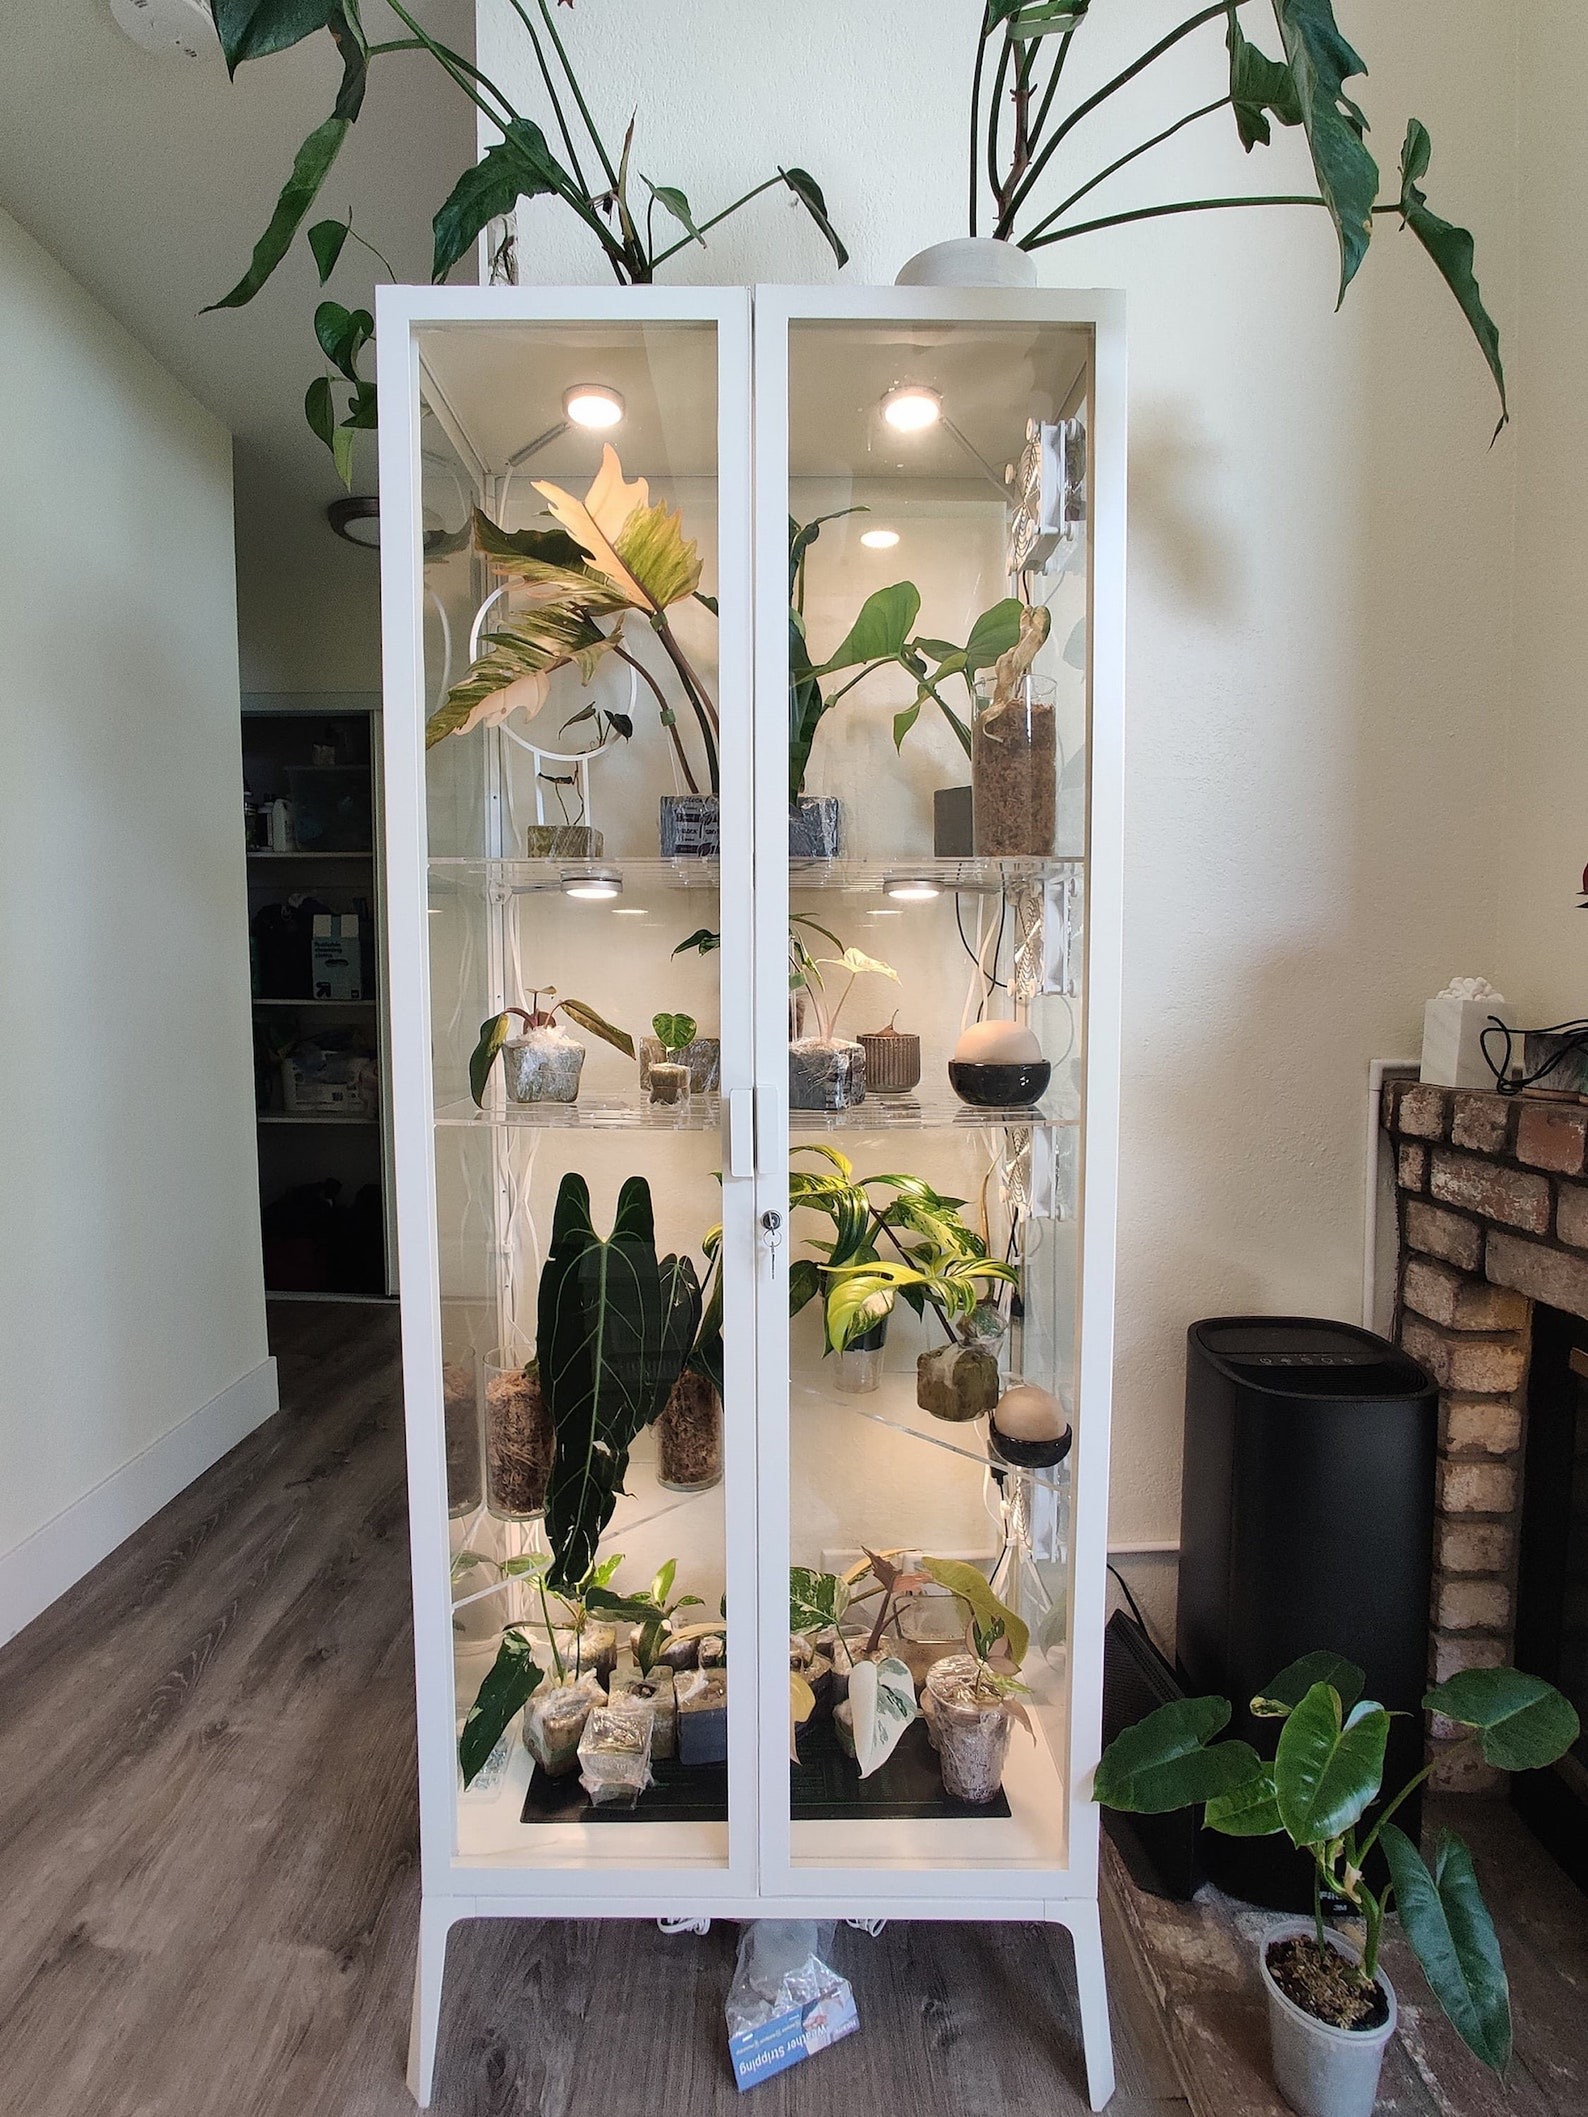 encased greenhouse shelf with glass panels with potted plants inside